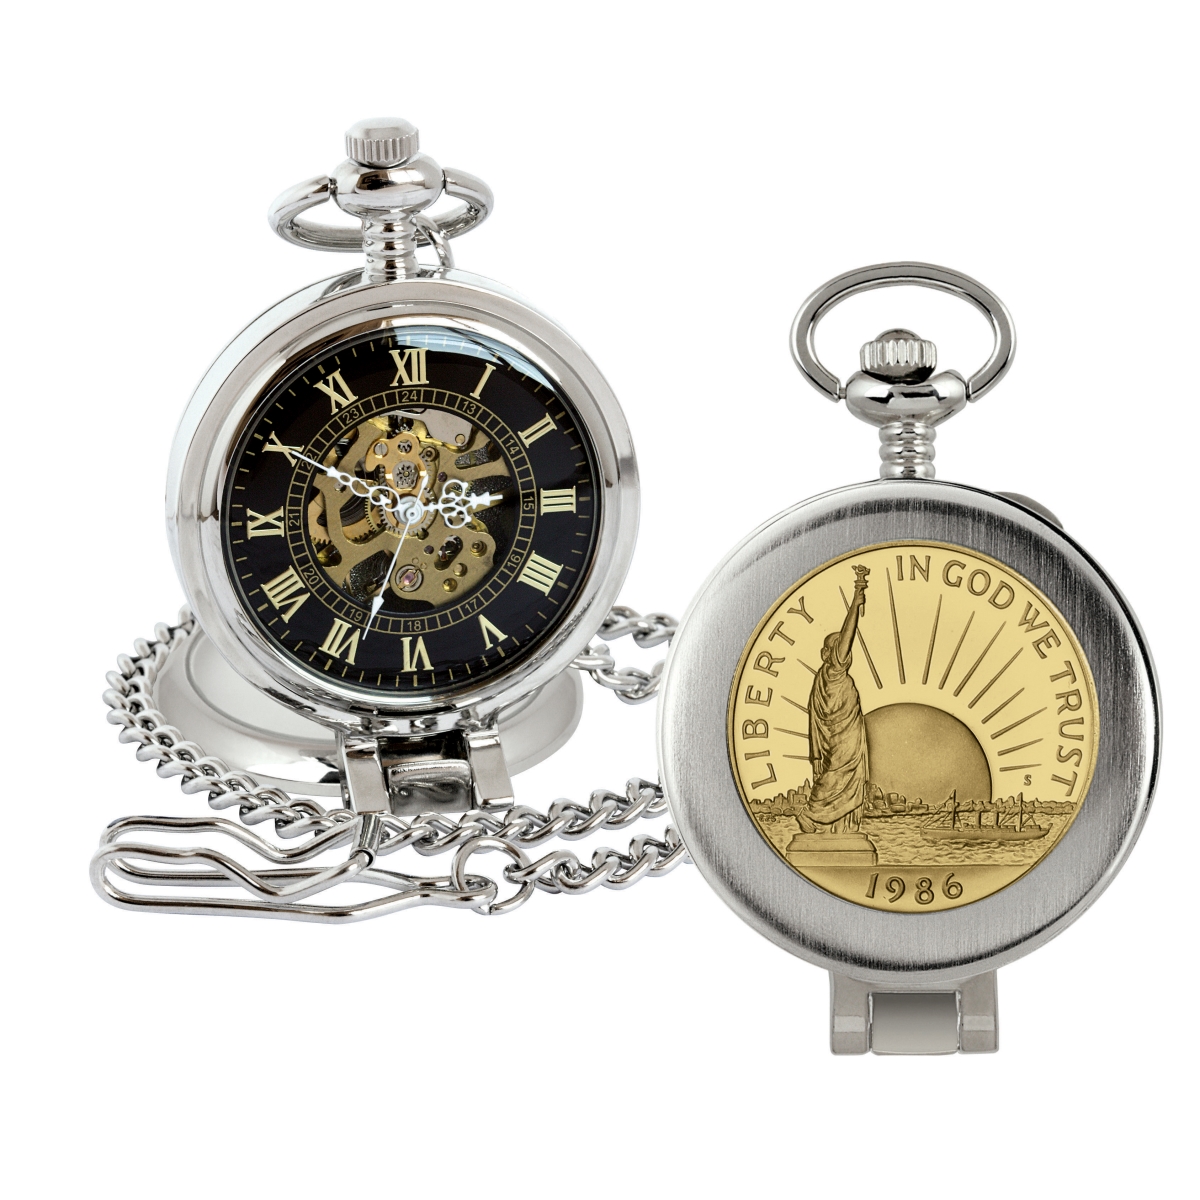 Picture of American Coin Treasures 16280 Gold-Layered Statue of Liberty Commemorative Half Dollar Coin Pocket Watch with Skeleton Movement, Black Dial with Gold Roman Numerals - Magnifying Glass